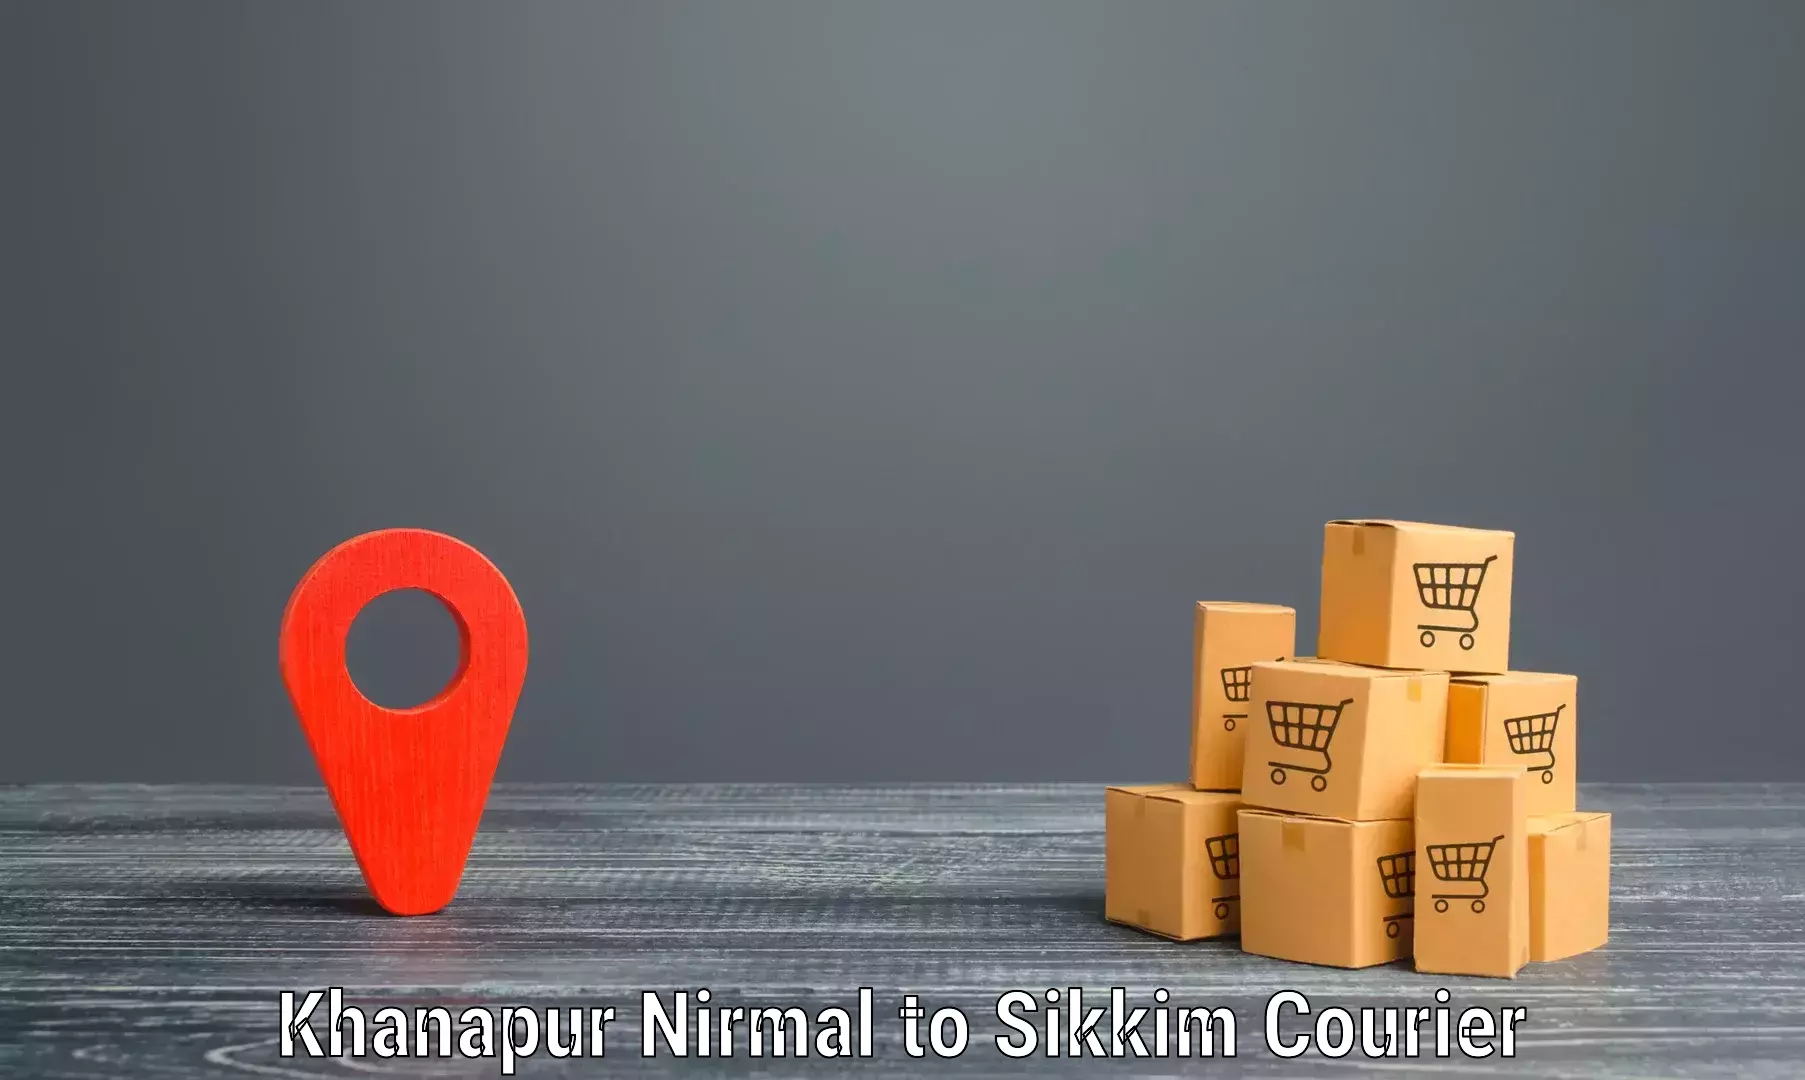 Full-service courier options Khanapur Nirmal to Pelling